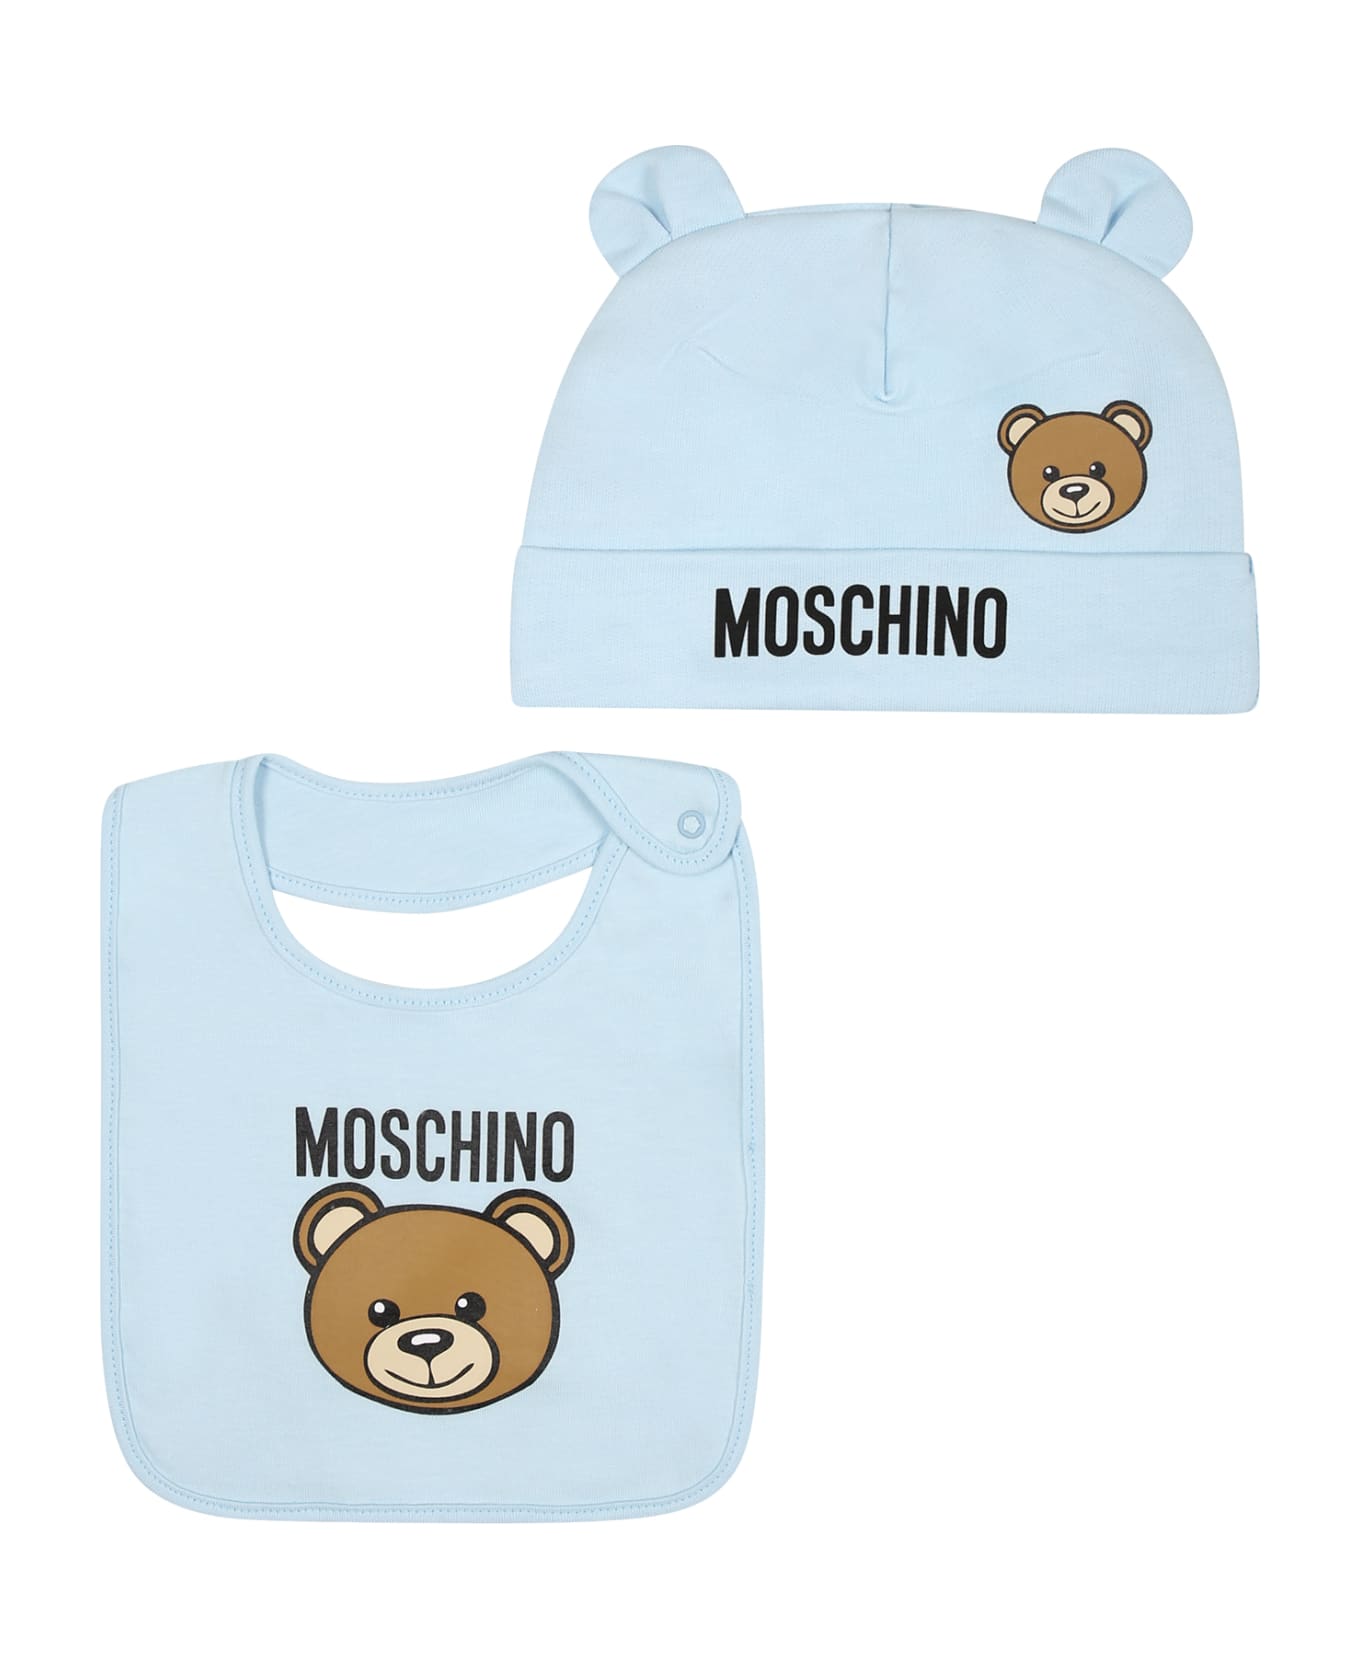 Moschino Light Blue Set For Baby Boy With Teddy Bear - Light Blue アクセサリー＆ギフト